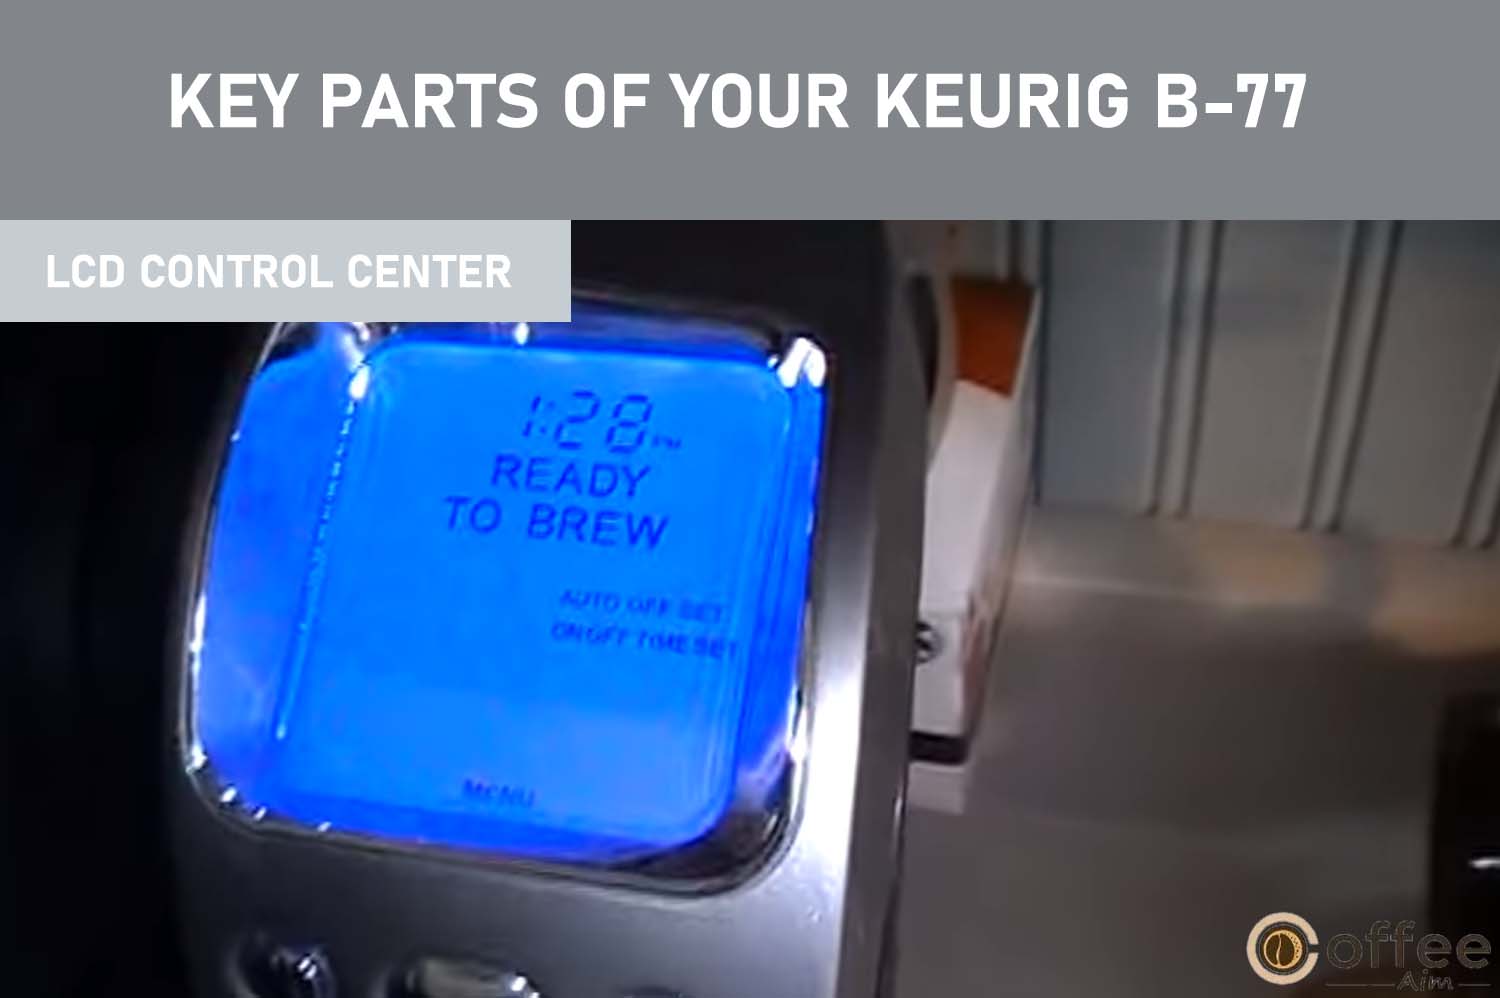 The LCD control center in the Keurig B-77 is a user-friendly feature located on the front side, displaying options and activities. It allows you to adjust brew temperature, size, and coffee strength with multiple buttons.